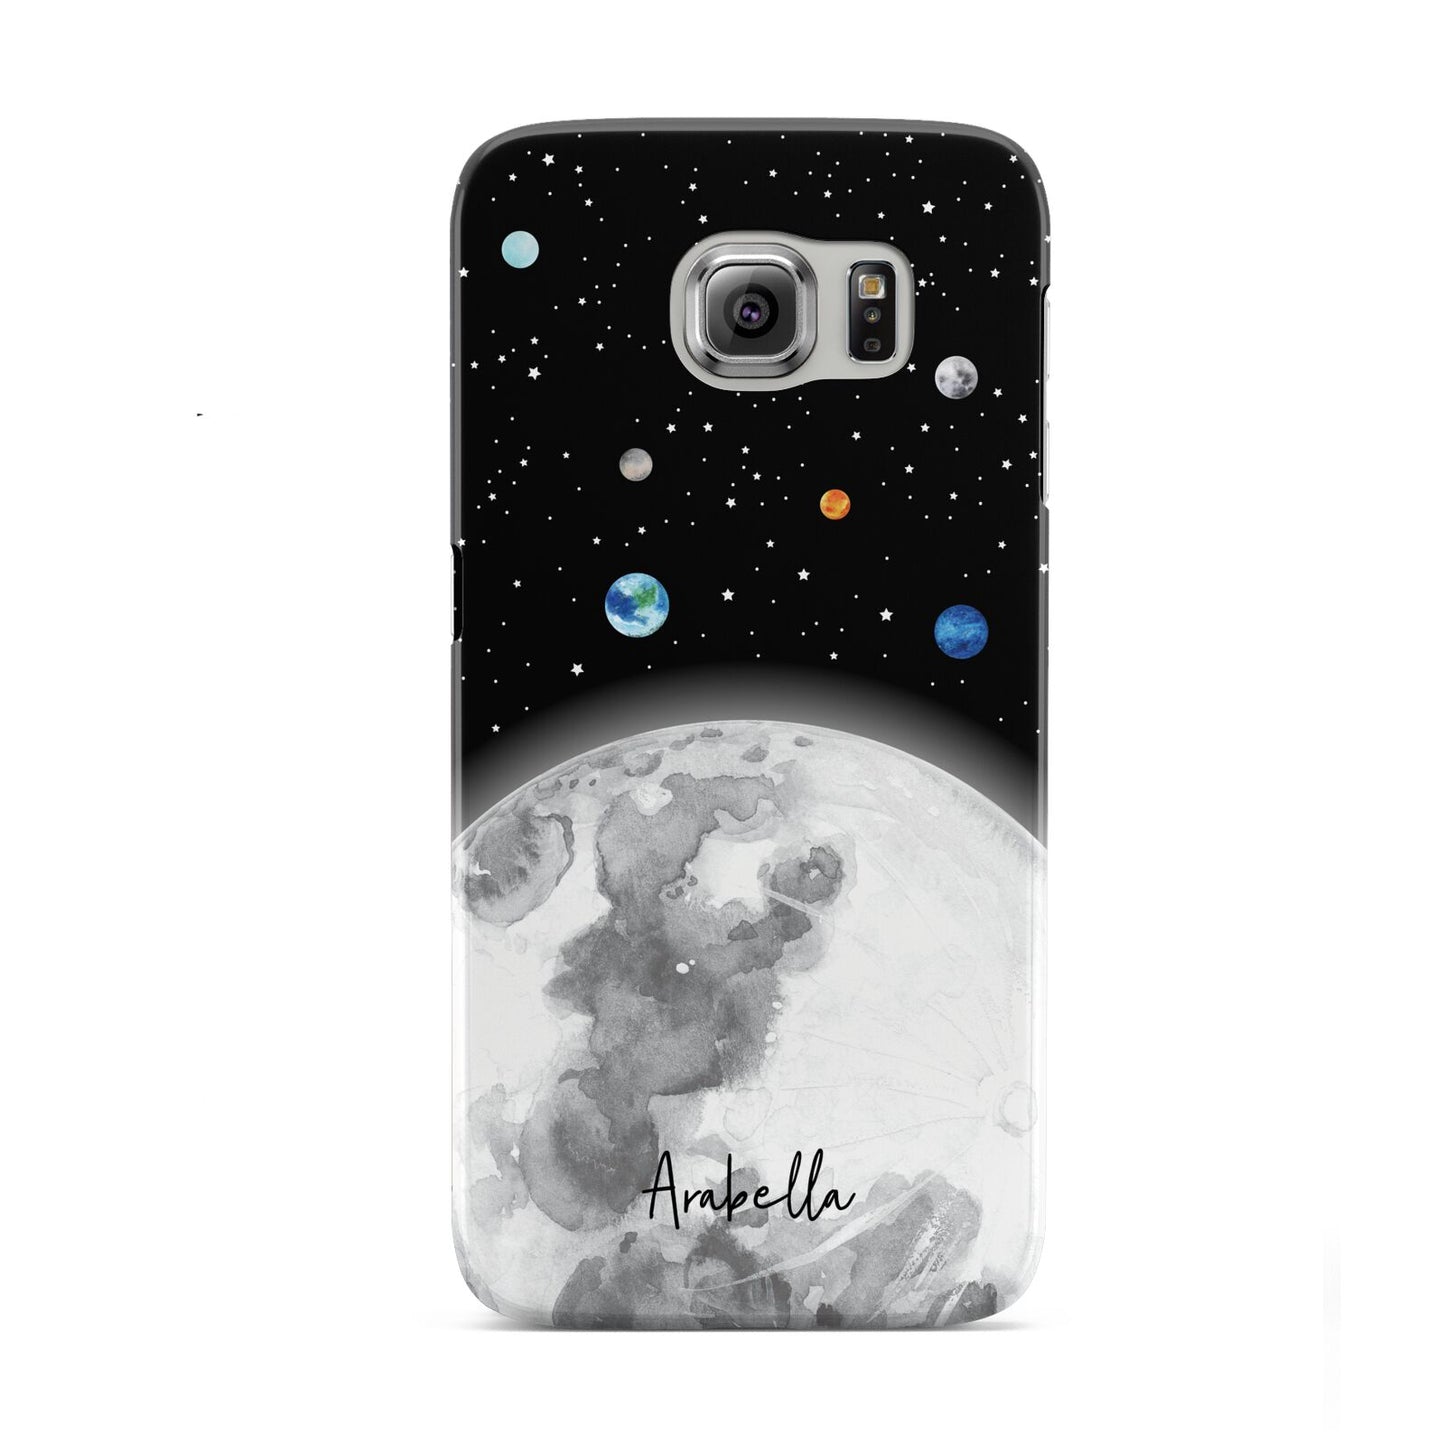 Watercolour Close up Moon with Name Samsung Galaxy S6 Case